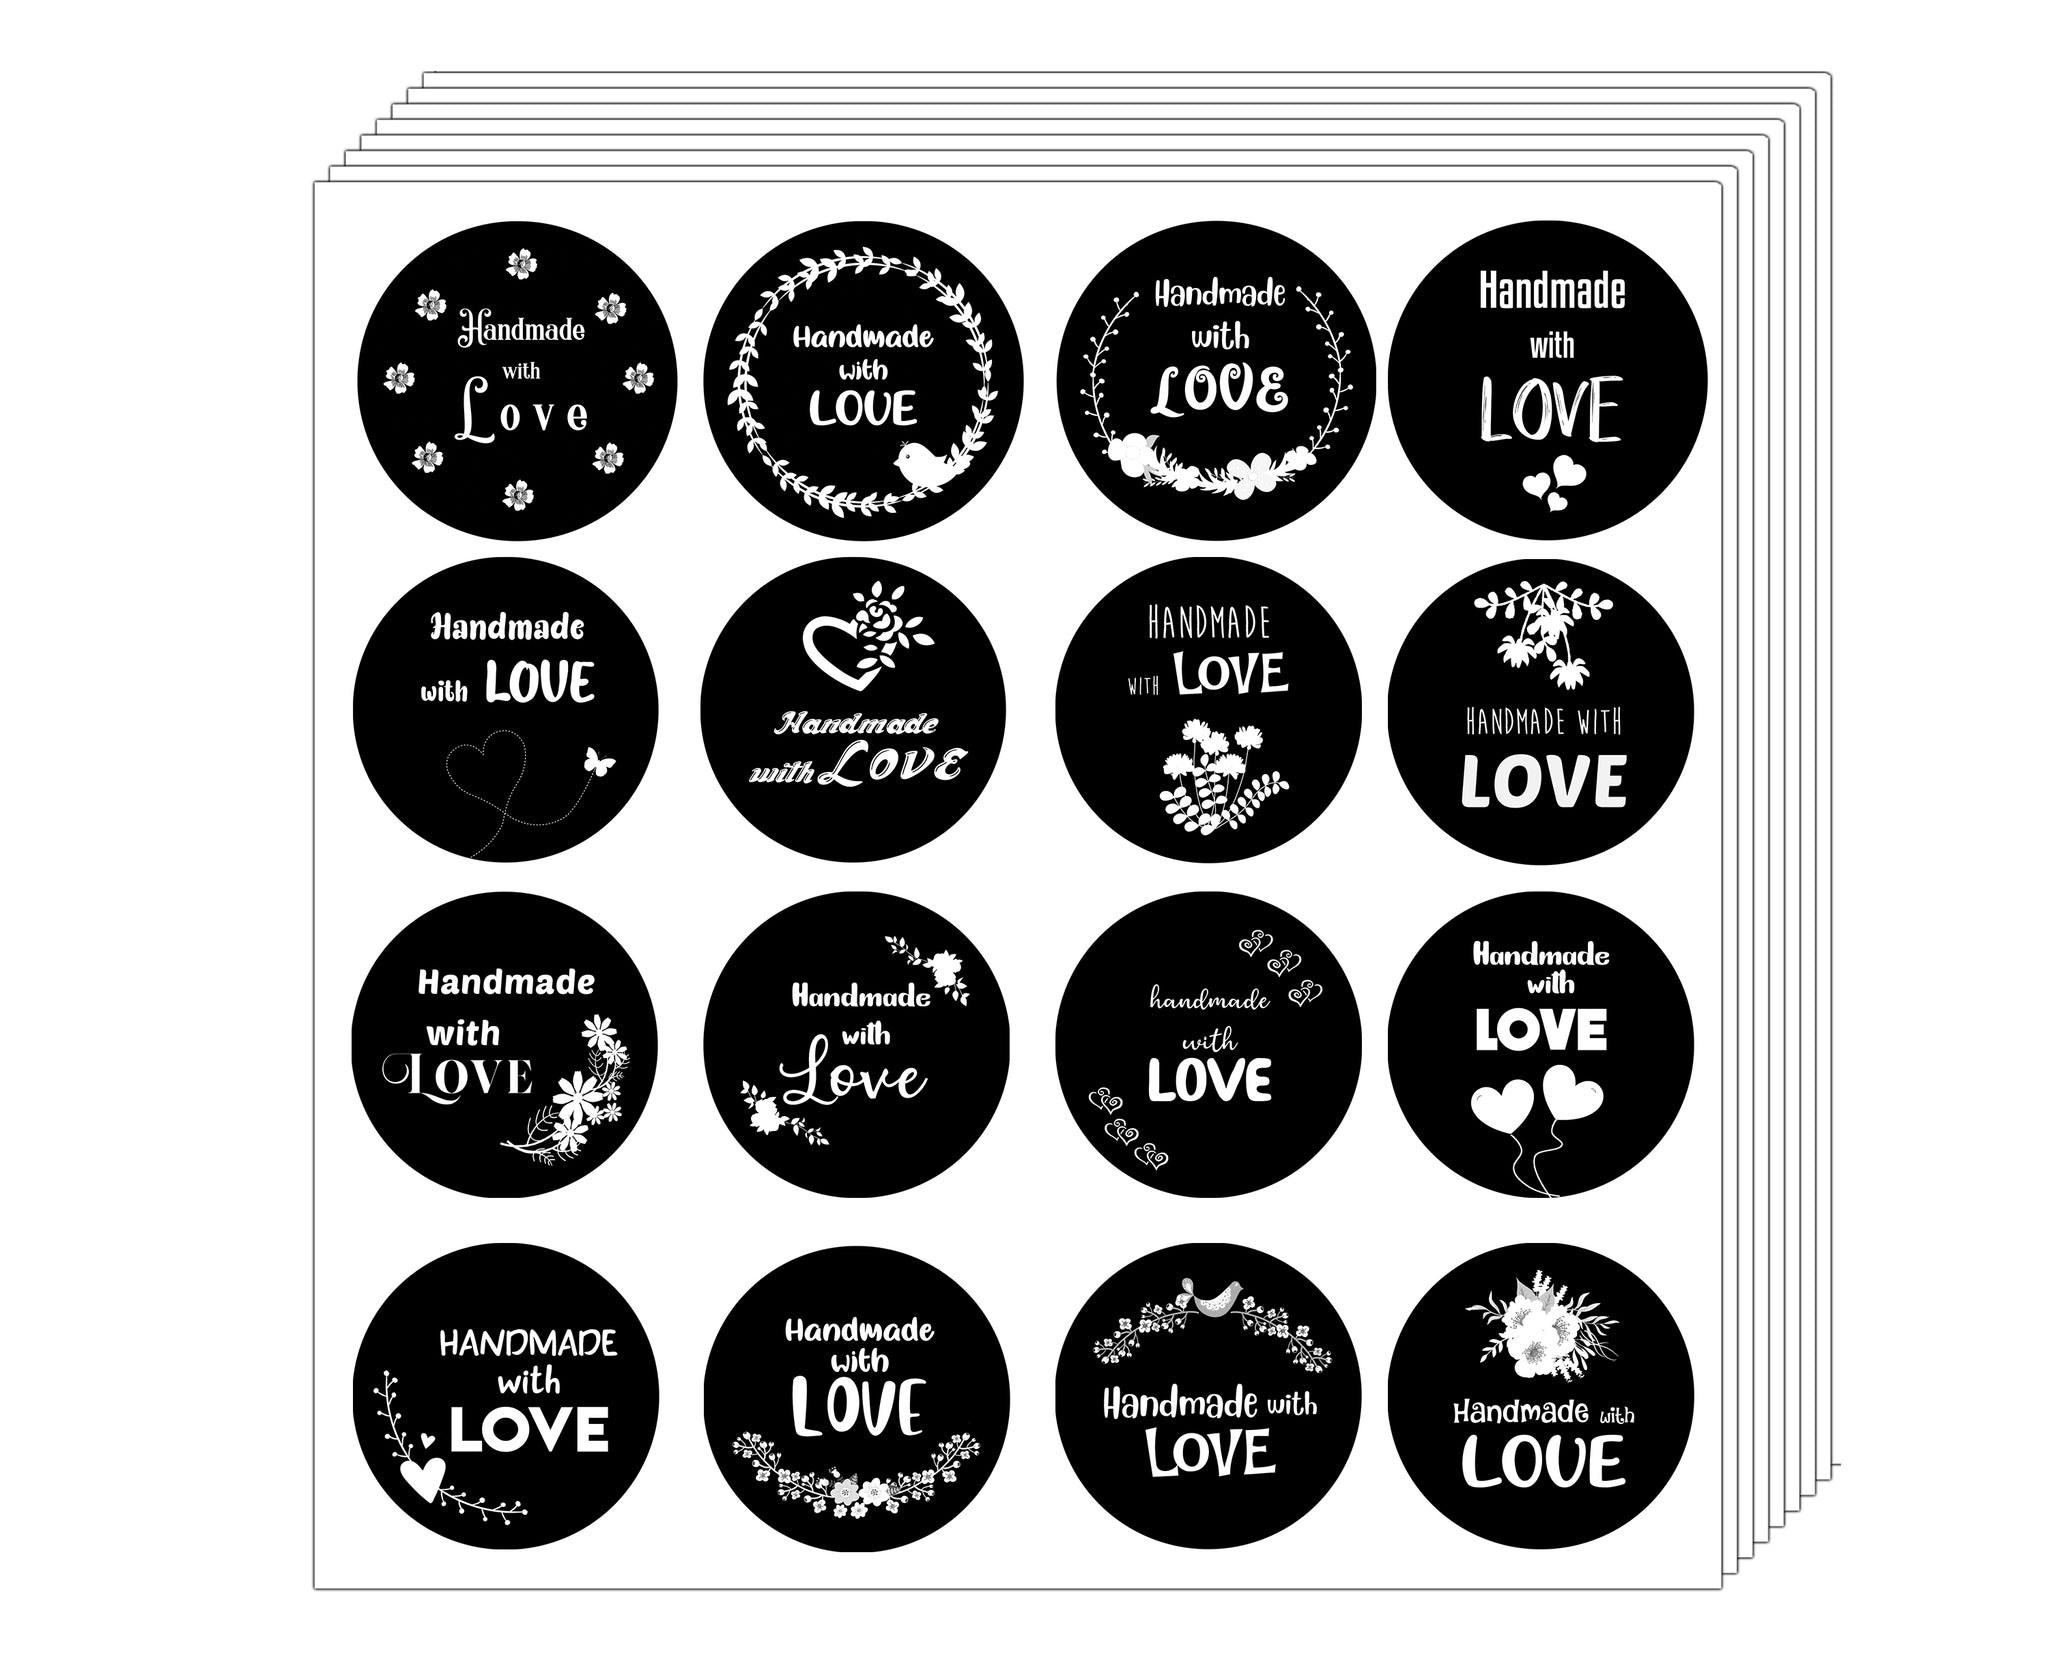 Creanoso Handmade with Love Stickers - Black and White (20-Sheet) - Assorted Bulk Pack - Gift Ideas for Men Women Boys Girls - Love Appreciation for Family, Relatives, and Friends